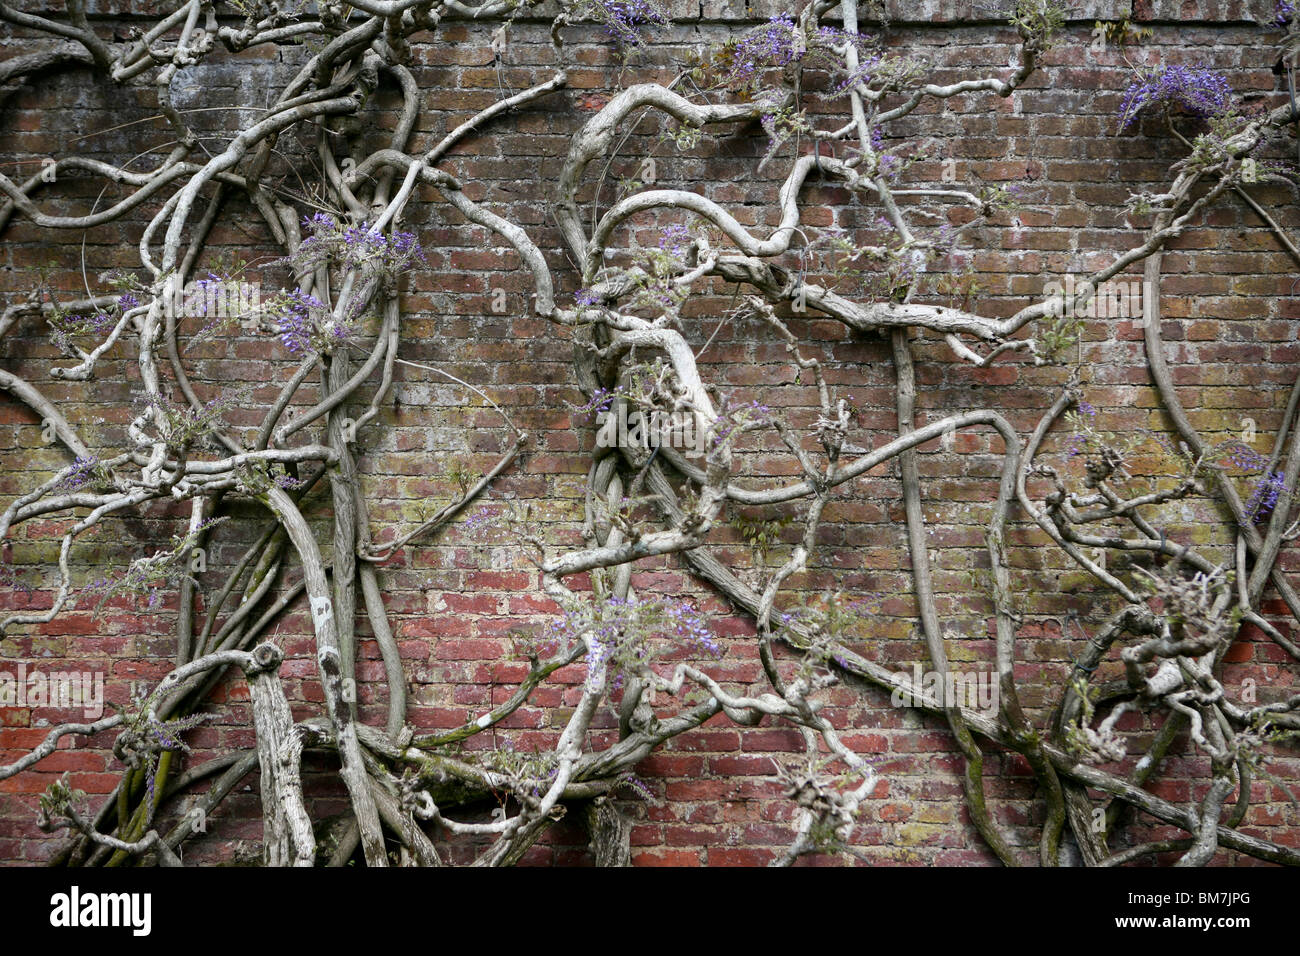 Wisteria sinensis (Chinese Wisteria) growing on a brick wall. Stock Photo